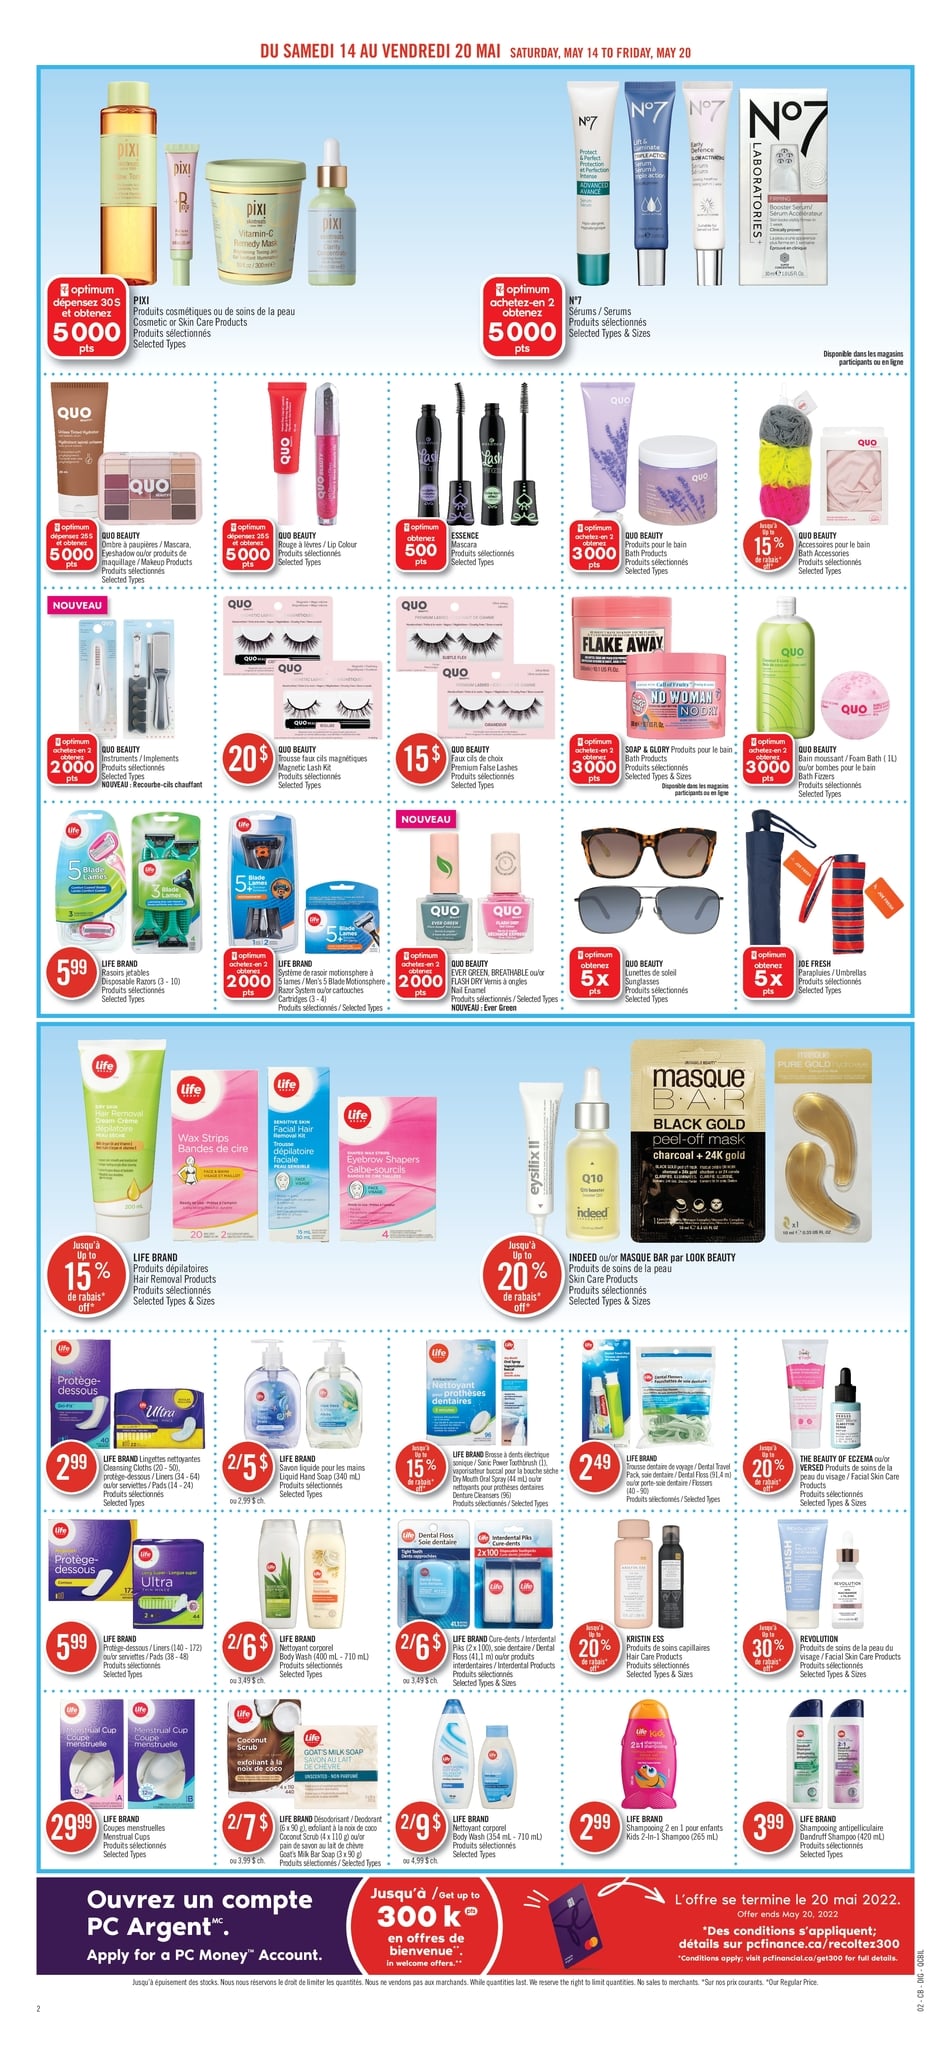 Pharmaprix - Weekly Flyer Specials - Page 13